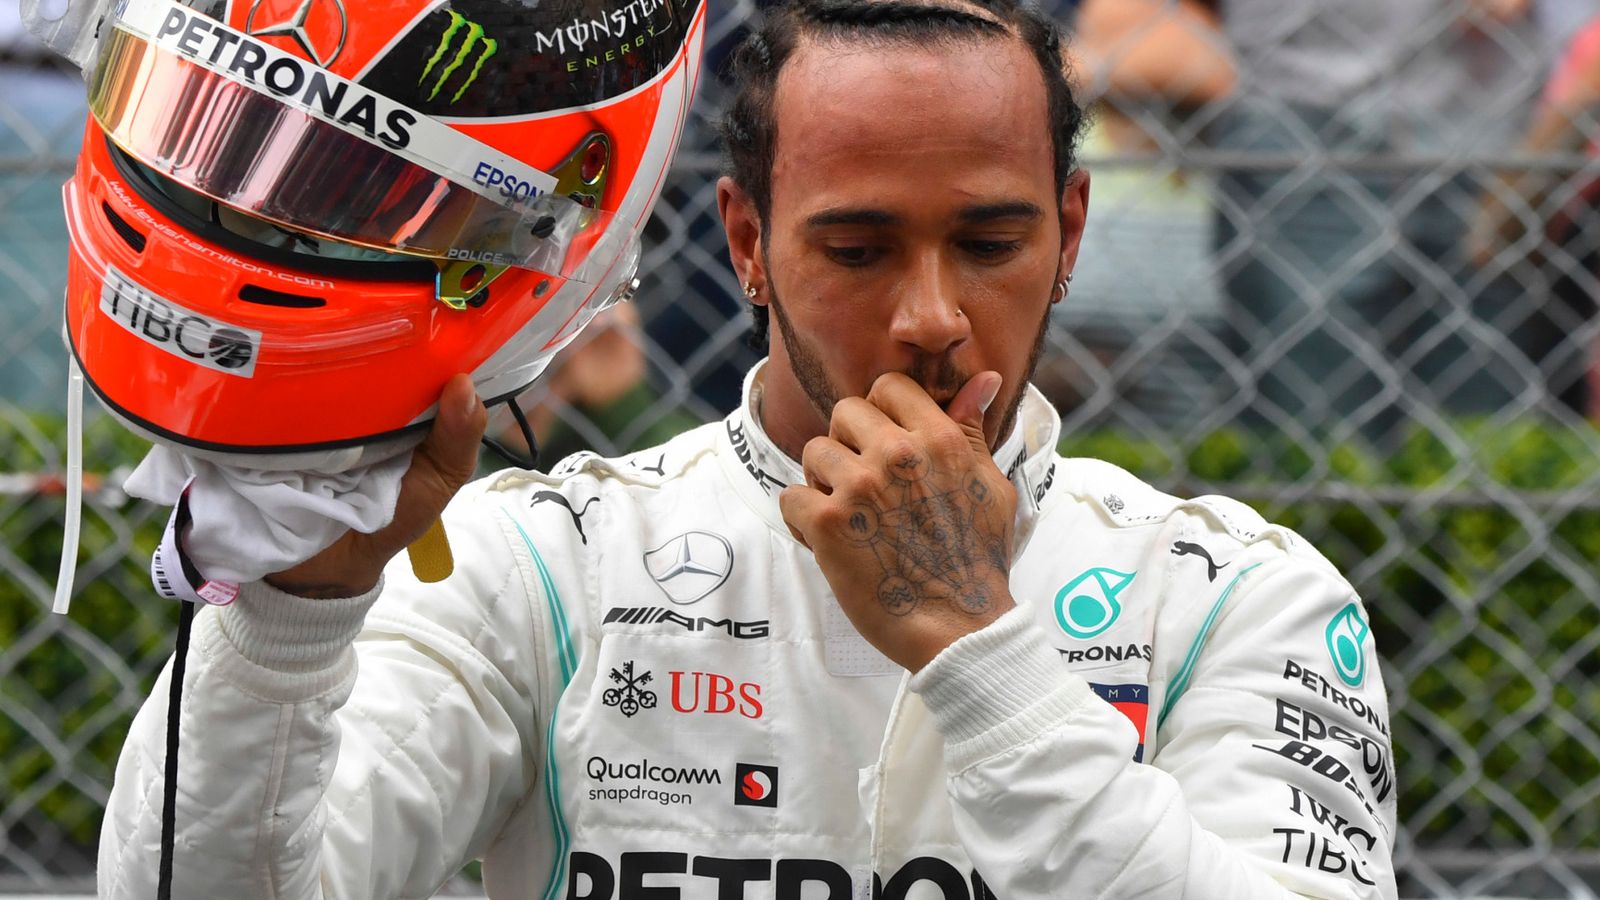 Lewis Hamilton exclusive: Monaco GP memories, the demands and the luck required to win F1 ‘lottery’